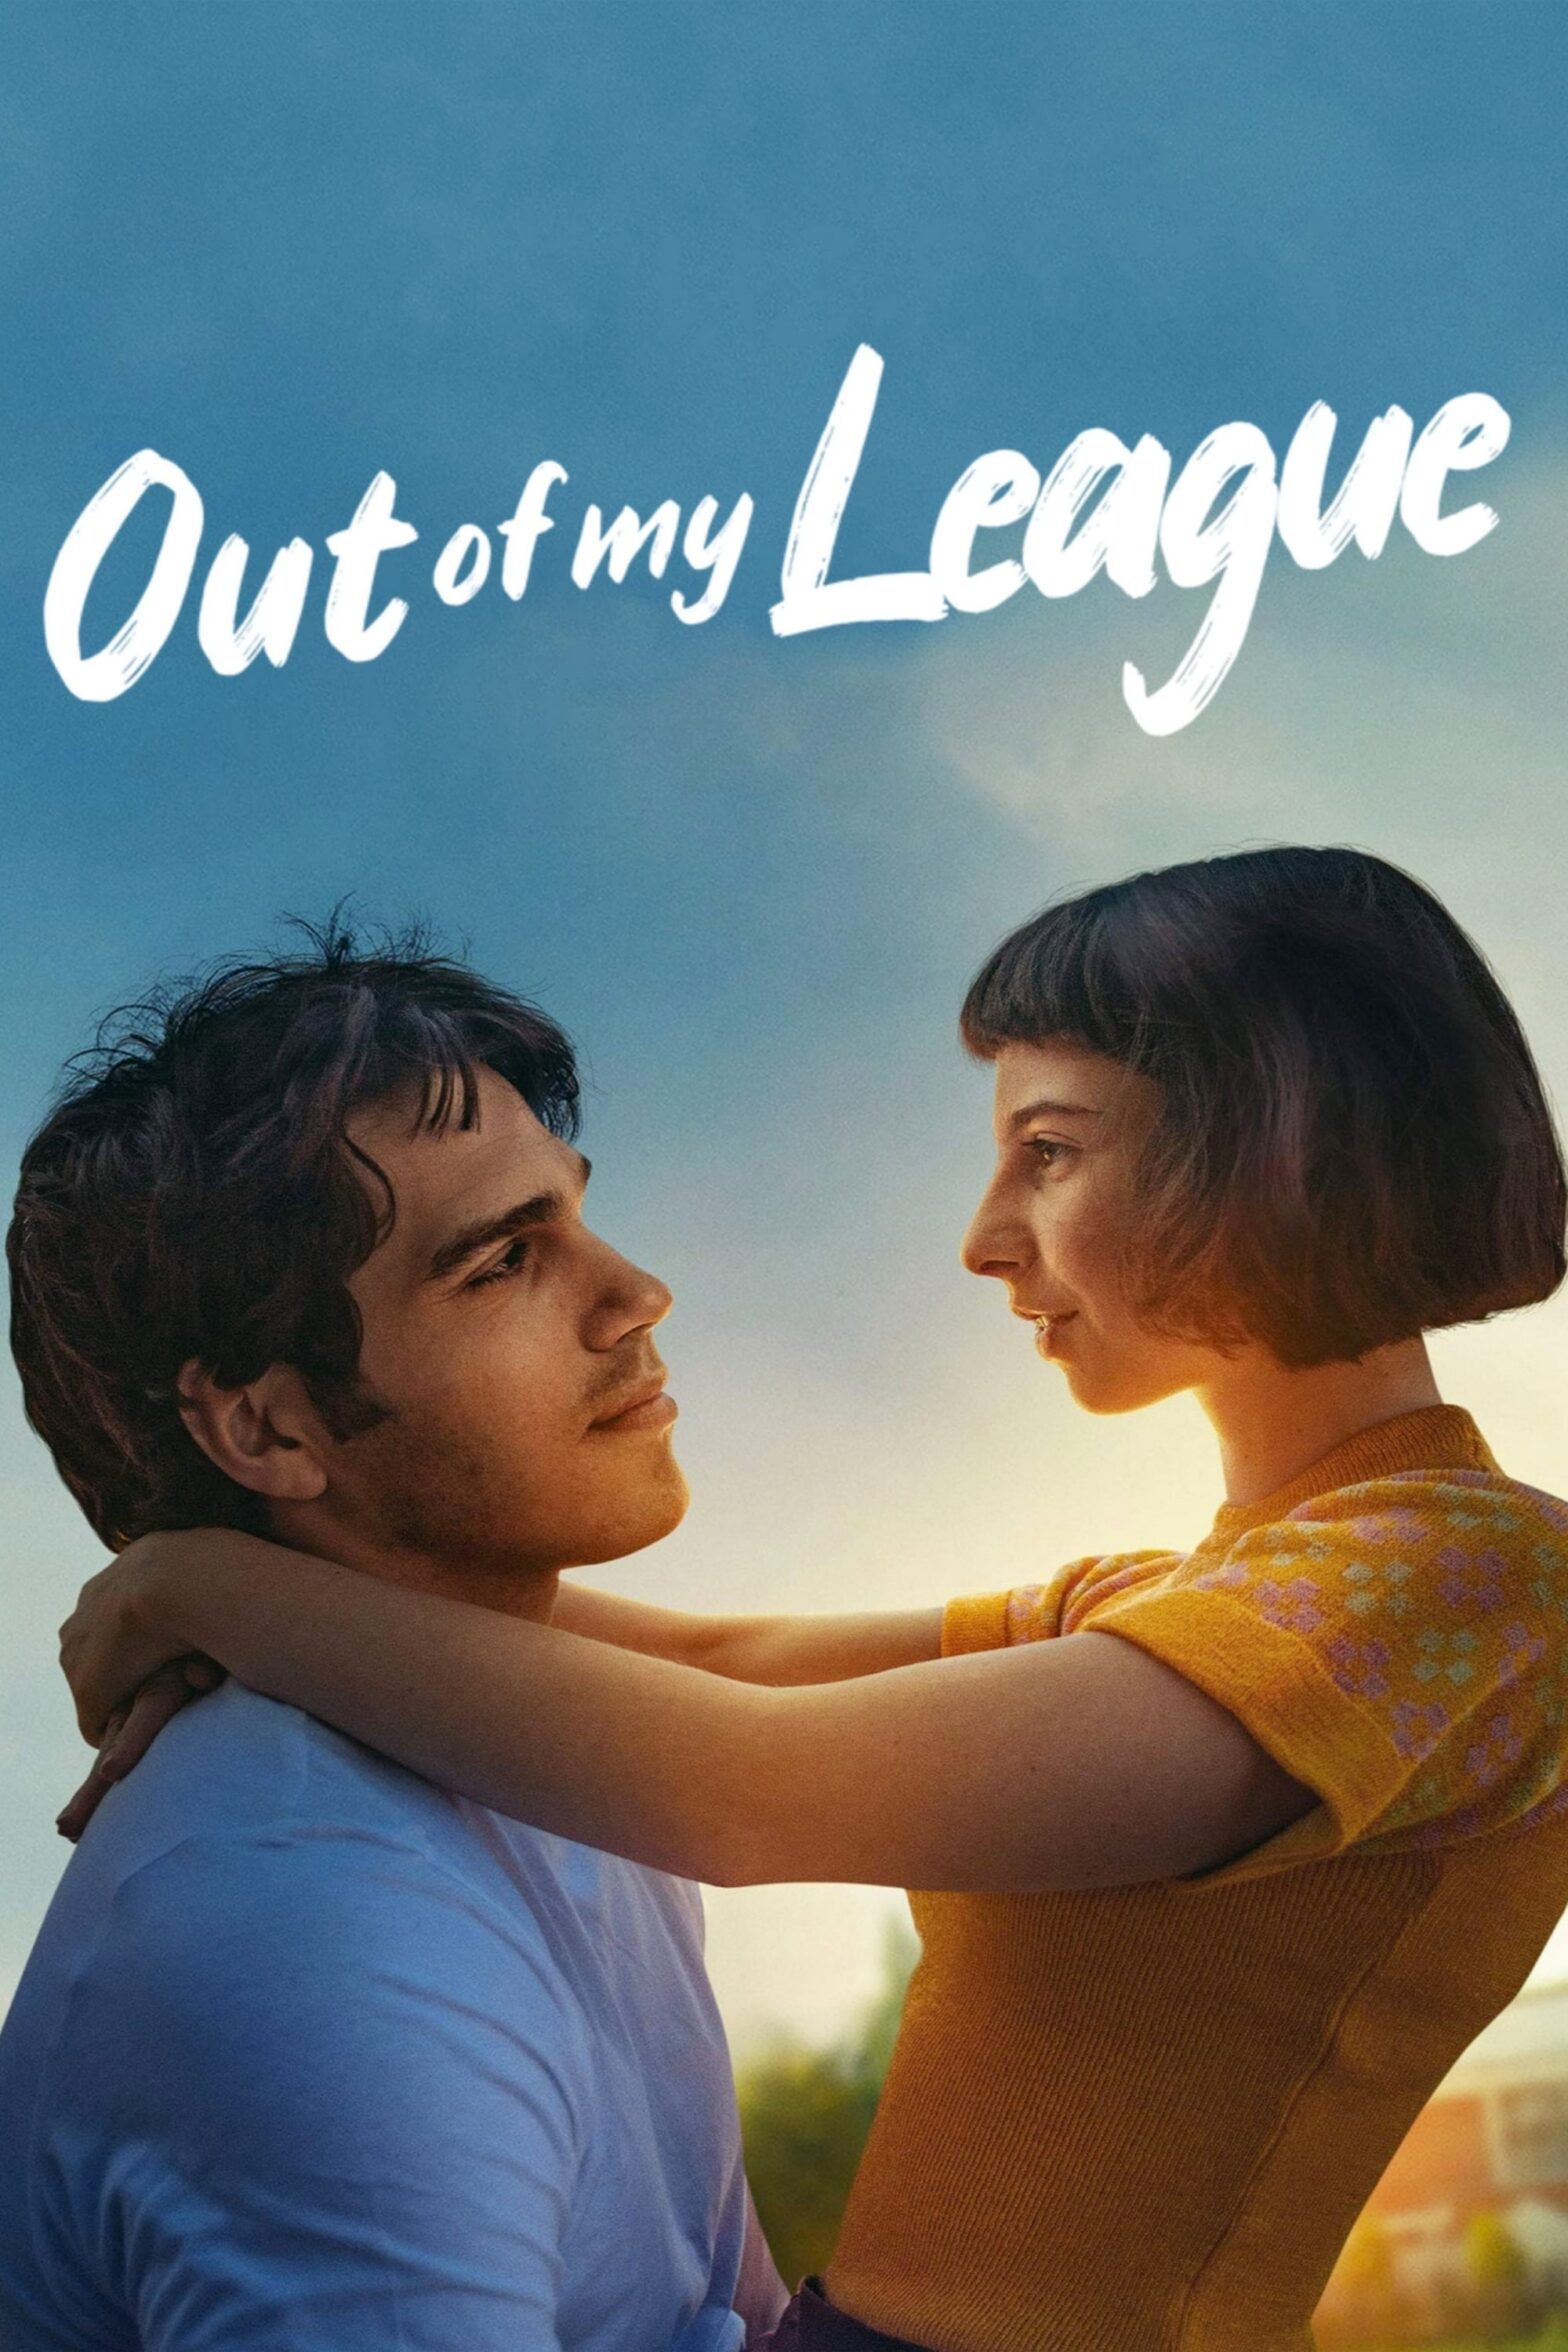 Poster for the movie "Out Of My League"